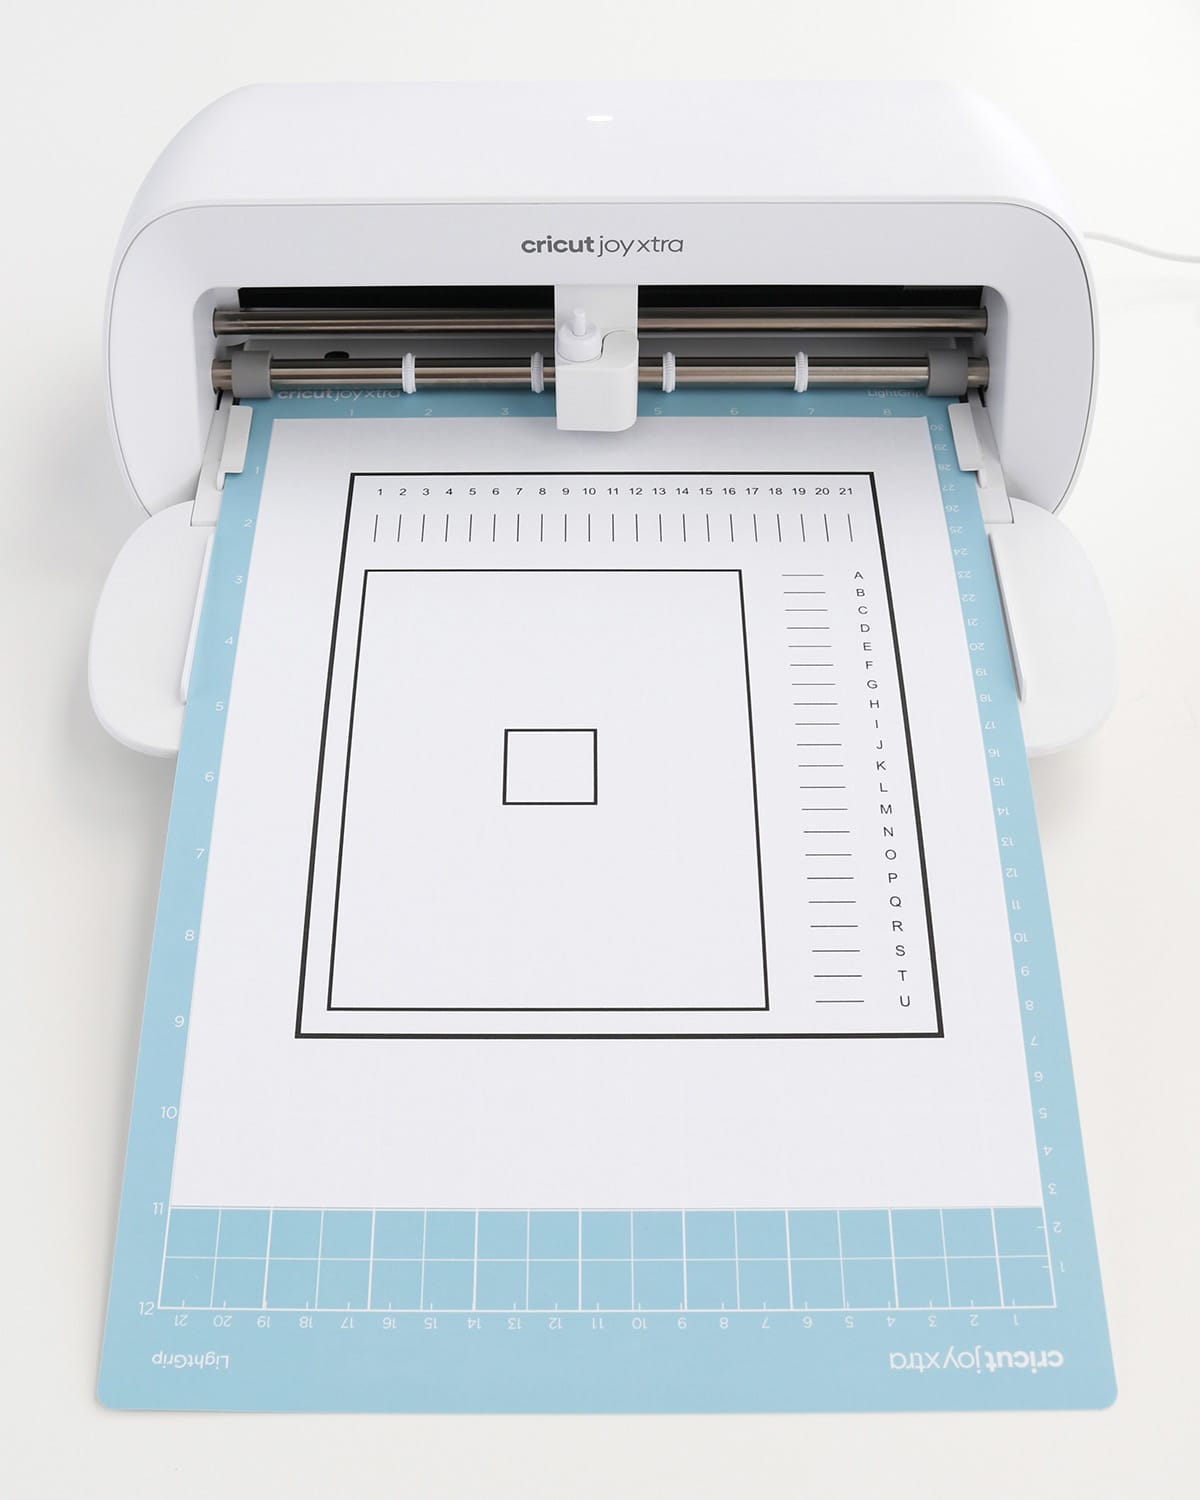 how to calibrate Cricut machines for Print Then Cut, image of Cricut Joy Xtra with calibration sheet loaded on mat